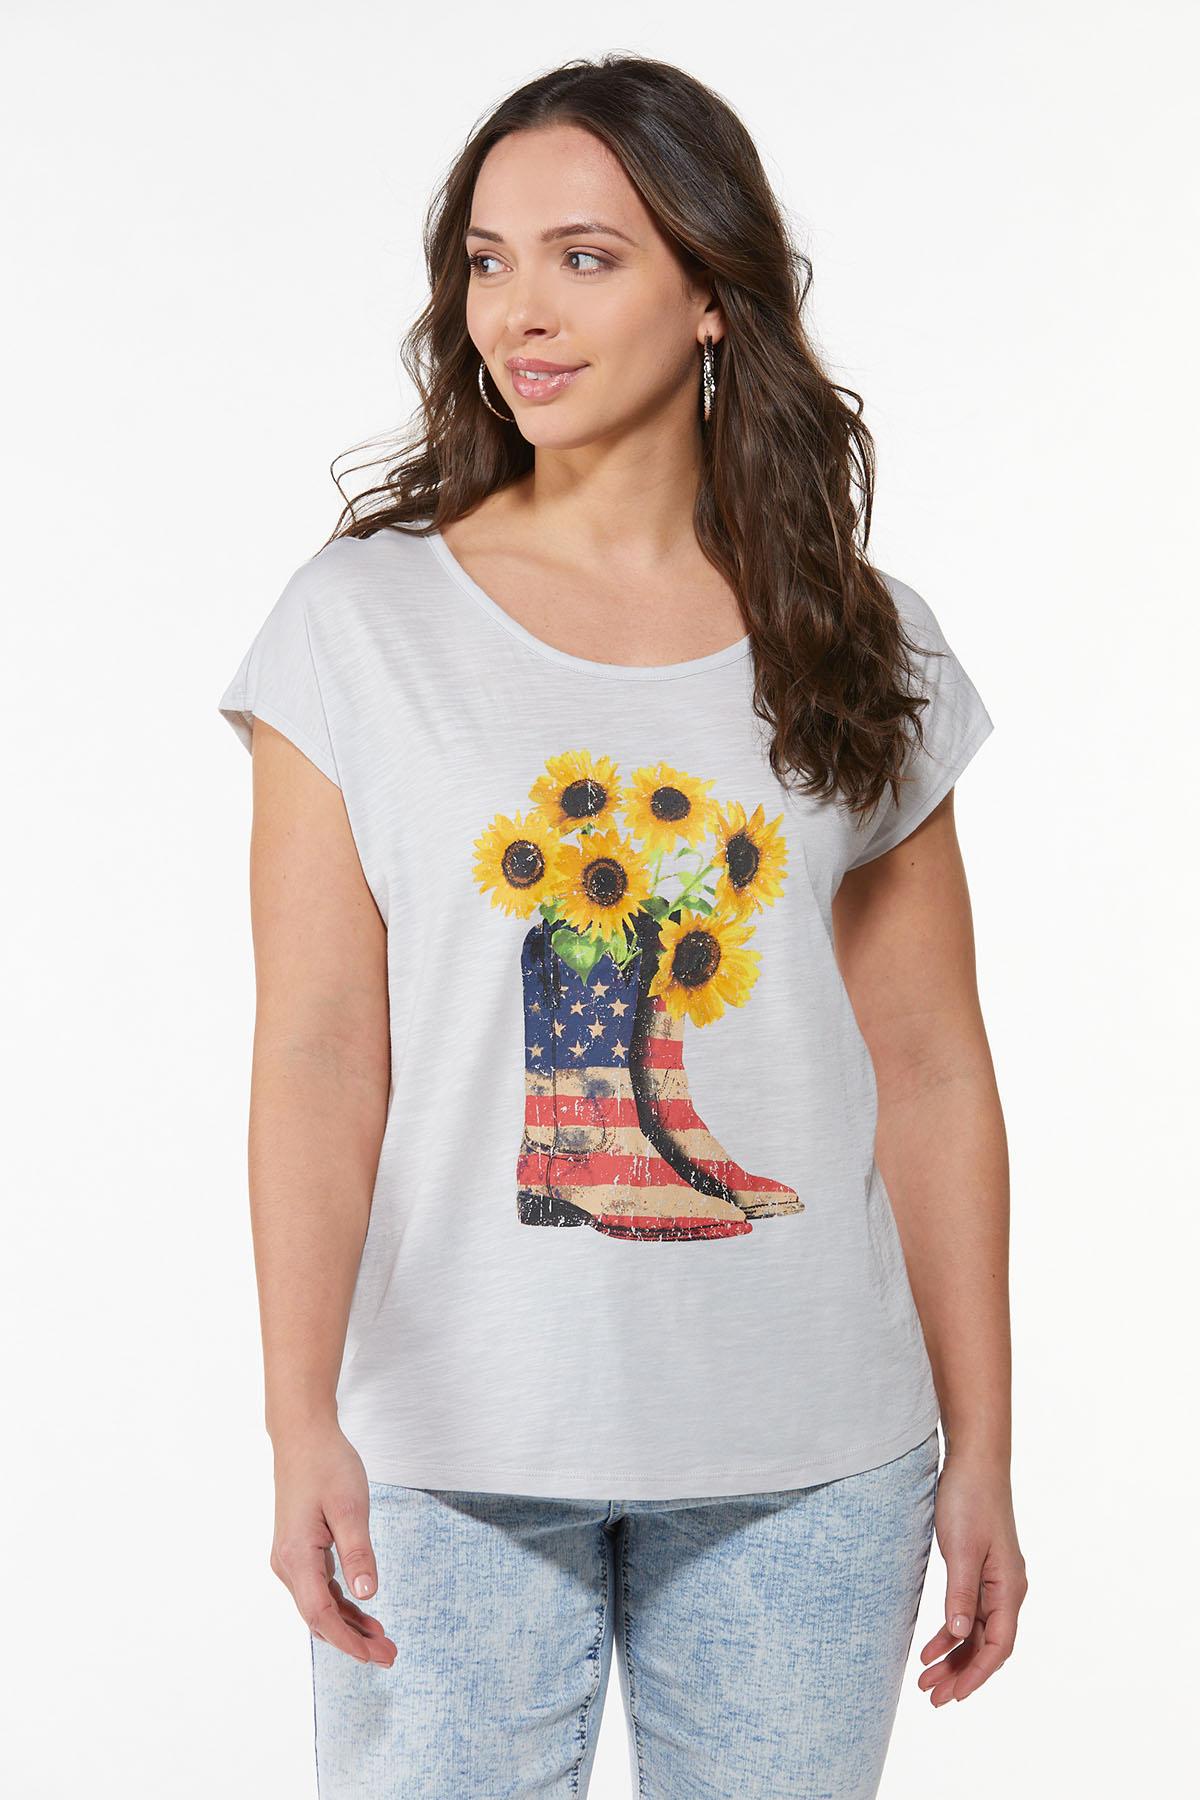 Boots And Blooms Tee